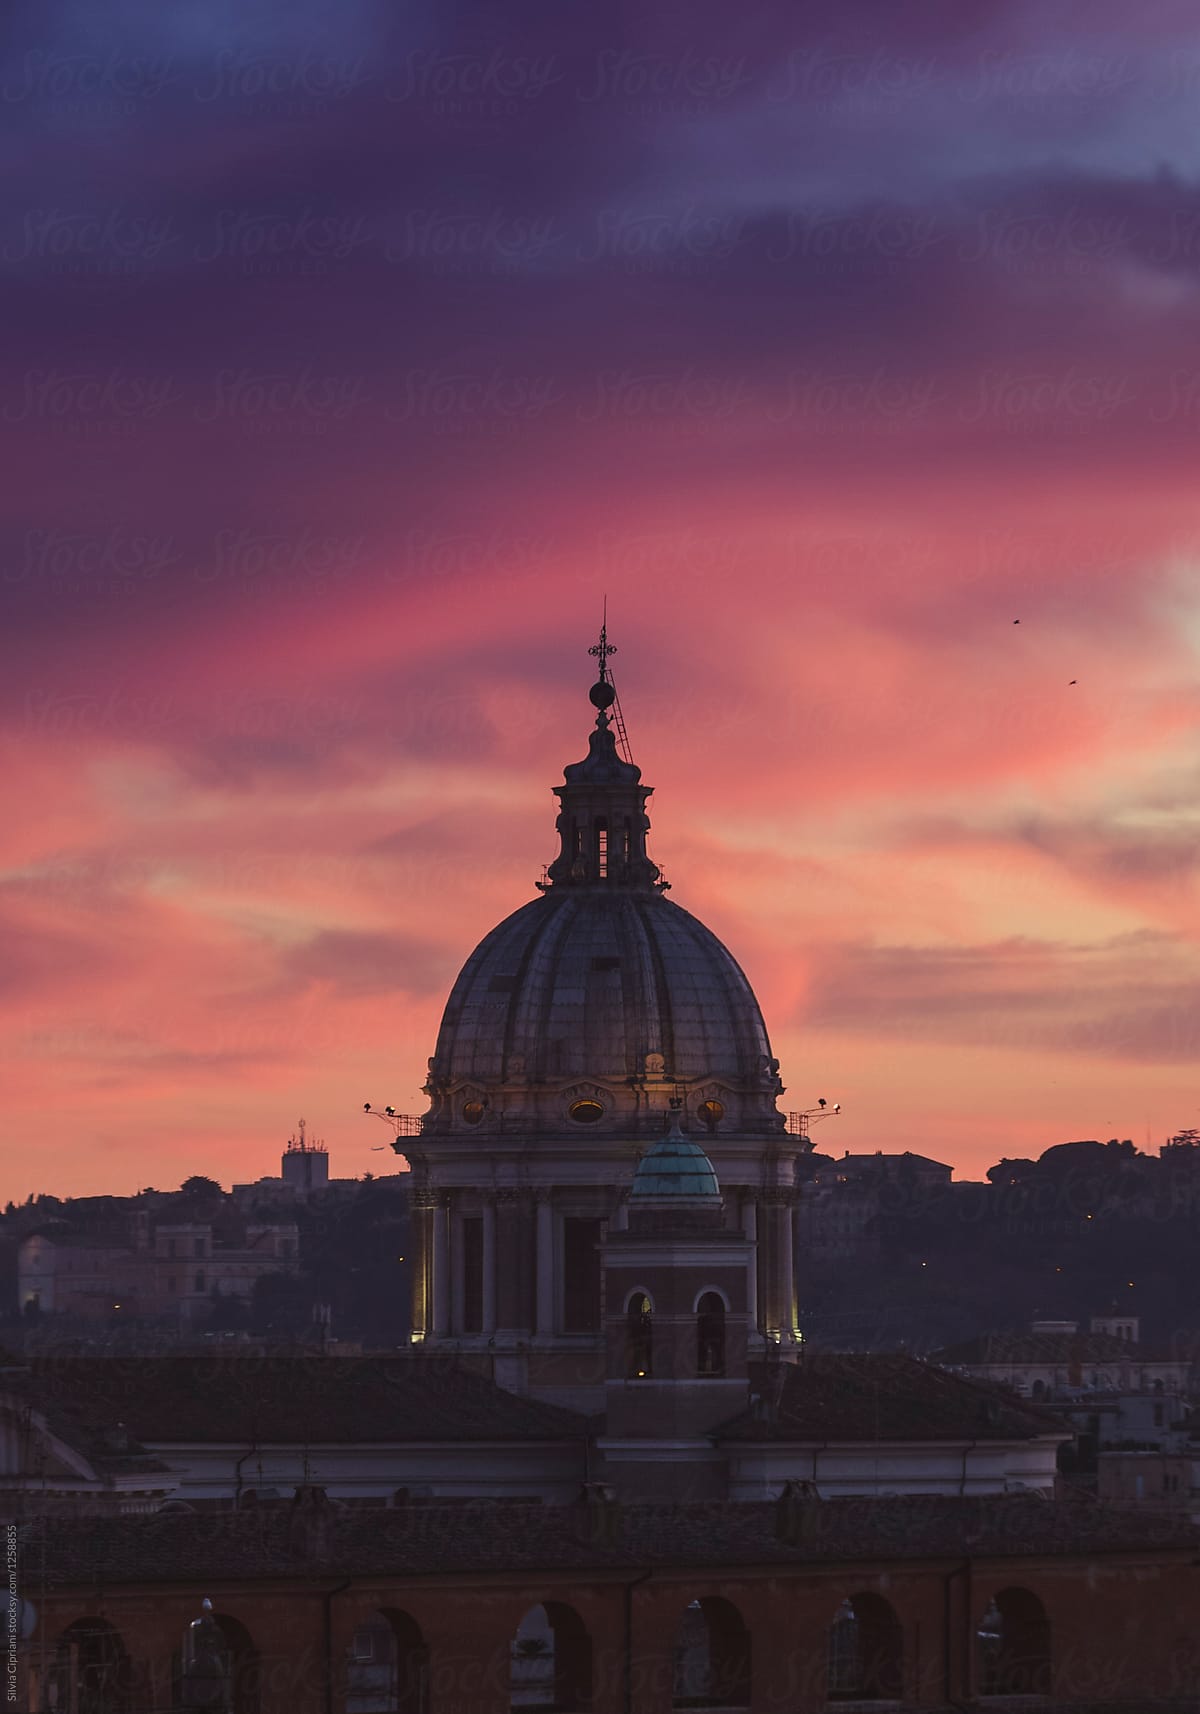 Rome at sunset